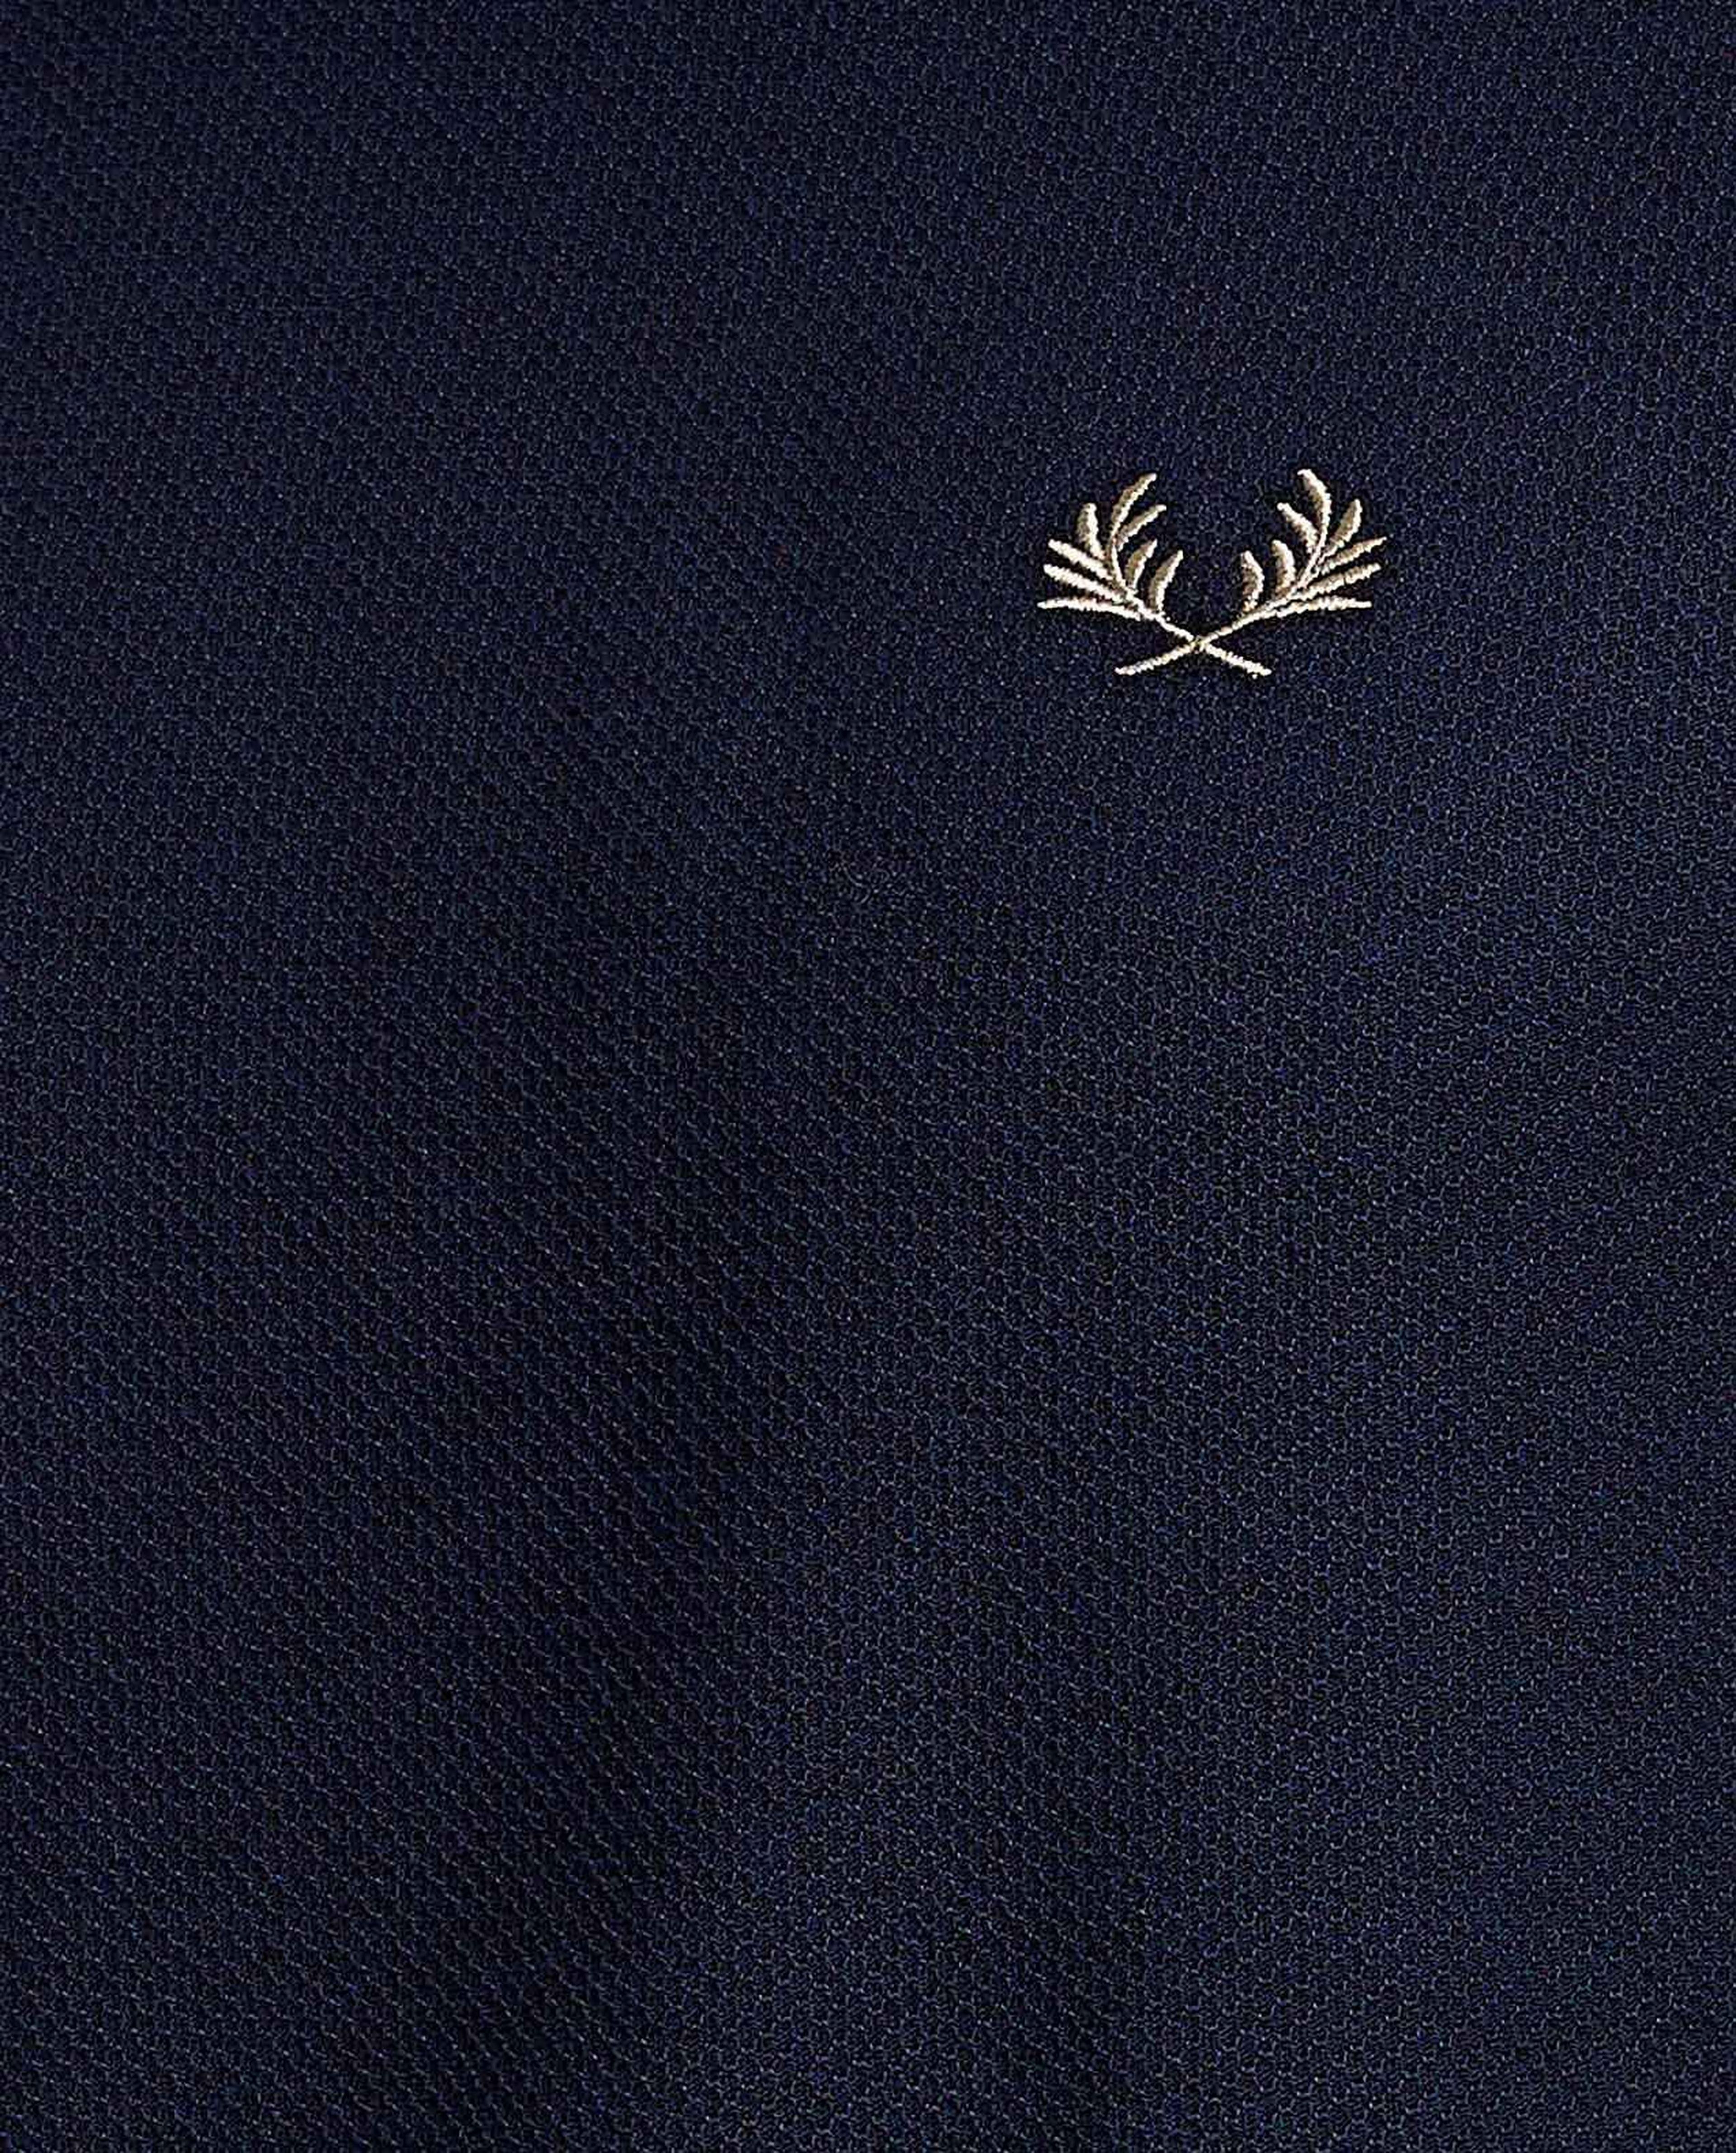 Embroidery Detail T-Shirt with Crew Neck and Short Sleeves